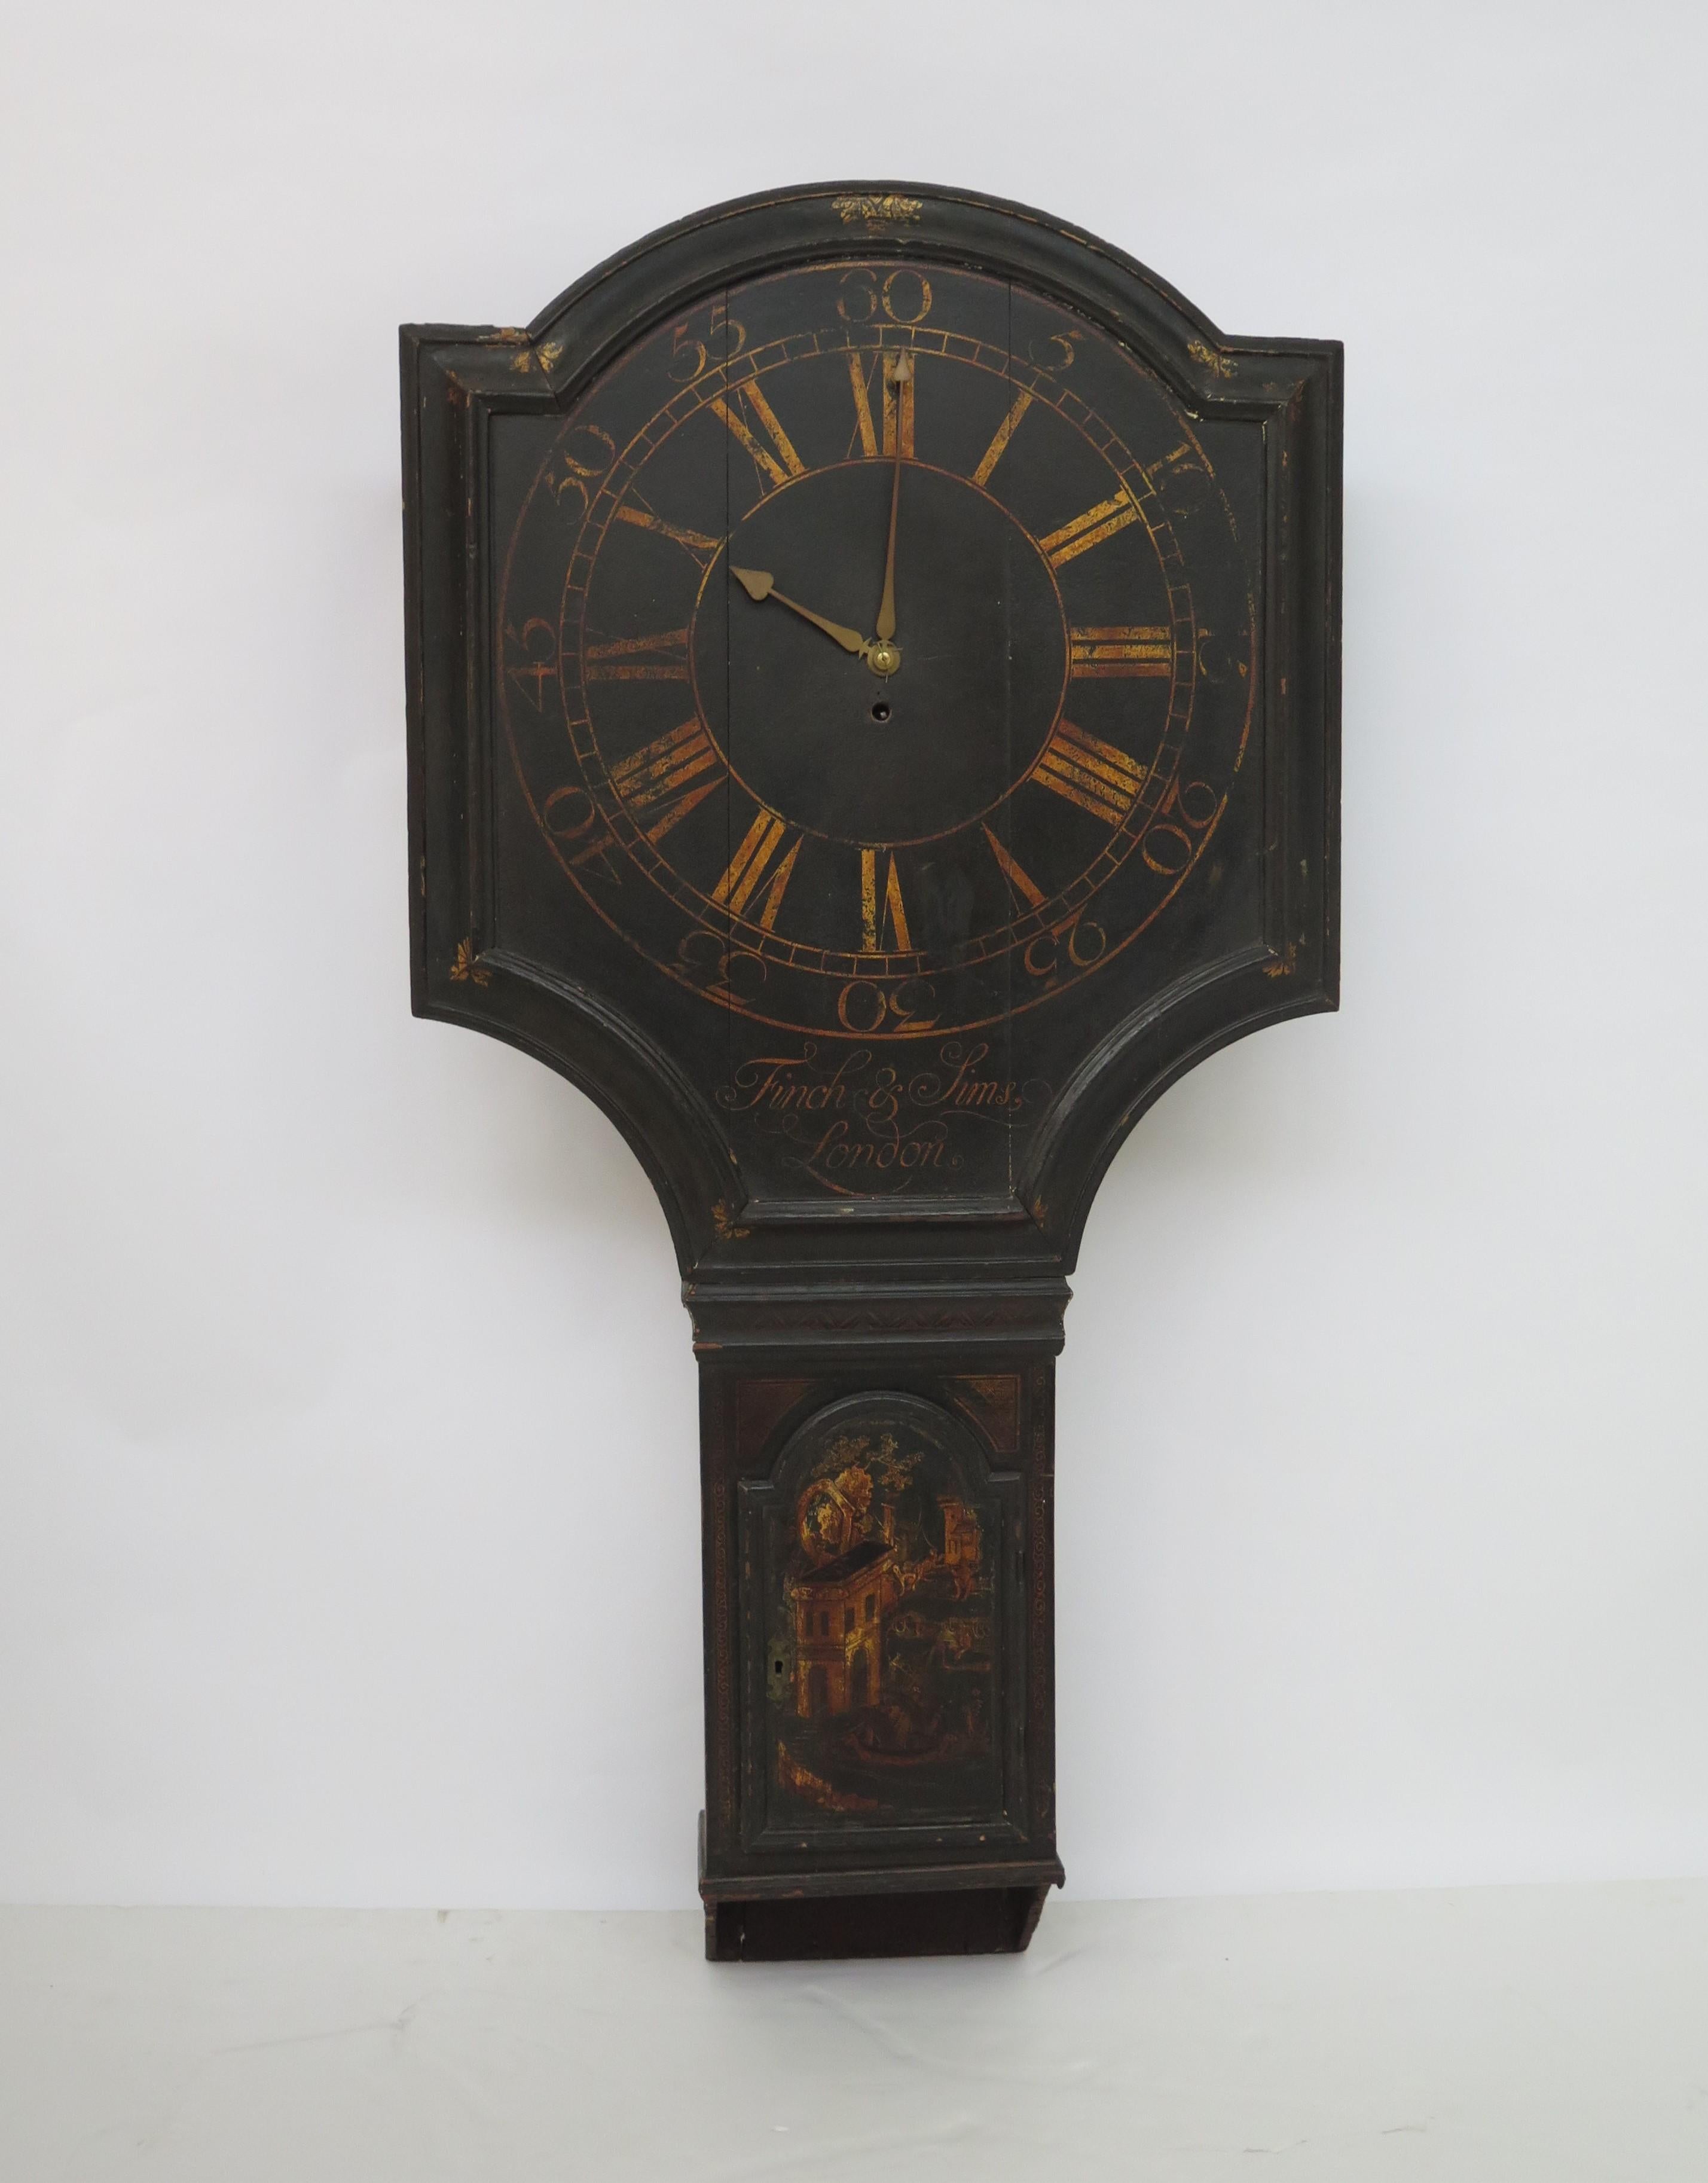 Act of Parliament Clock/ Tavern Clock with black lacquer Chinoiserie case by Finch and Sims of London, England, circa 1743

AS FOUND, some of the clockworks / gears are inside, but the clock has no pendulum (sold a a decorative item only) 

there is